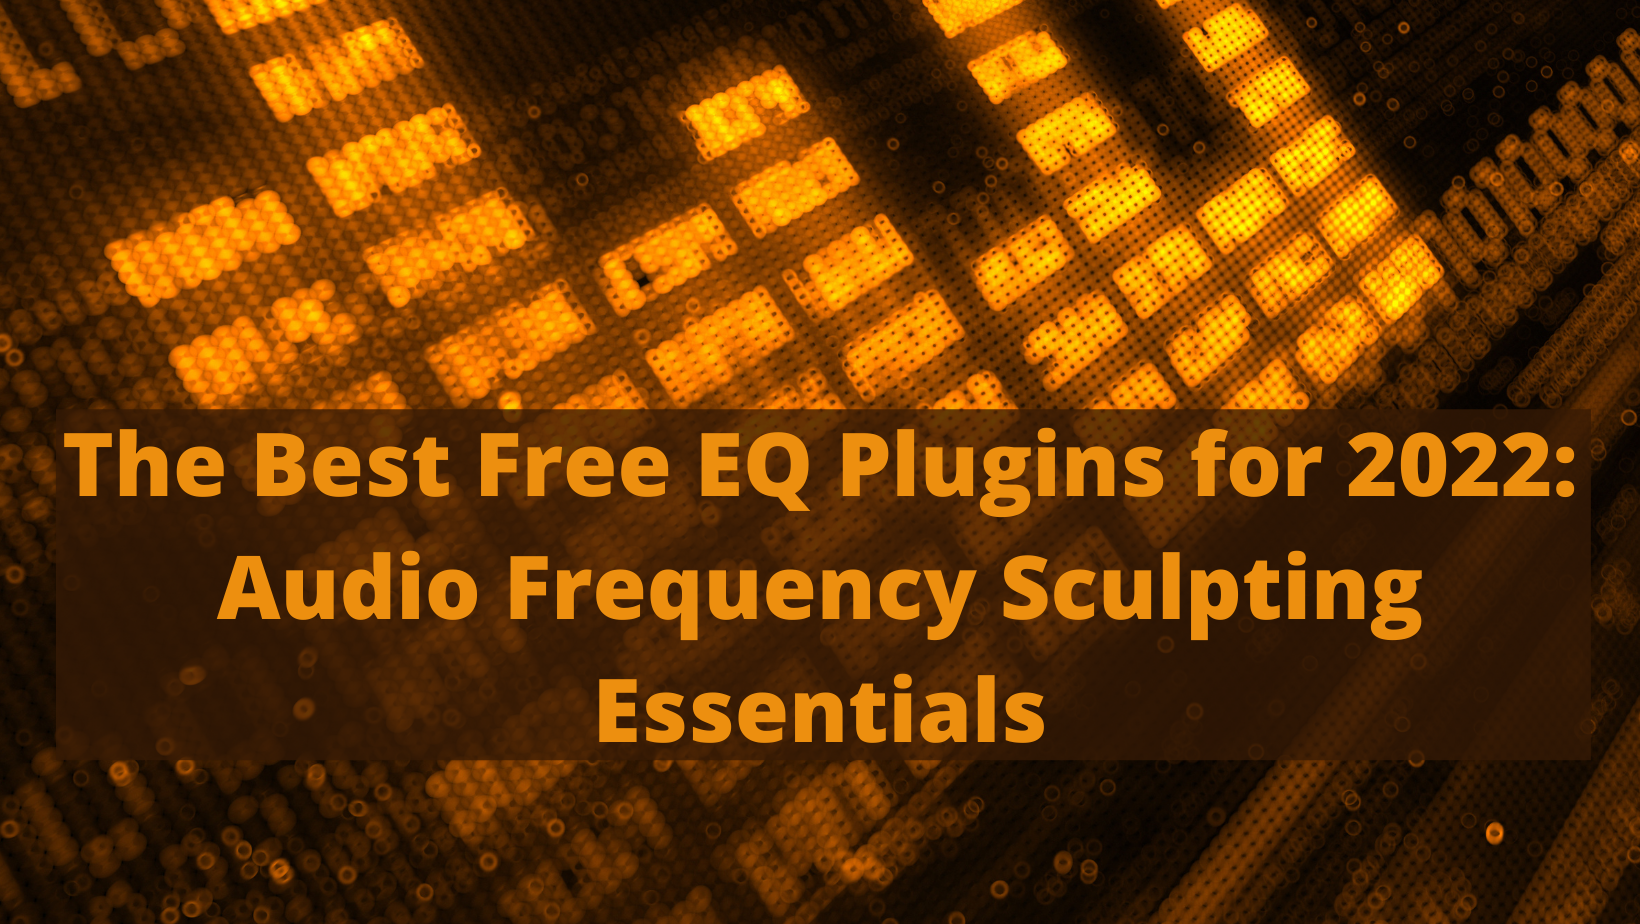 The Best Free EQ Plugins for 2022 Audio Frequency Sculpting Essentials